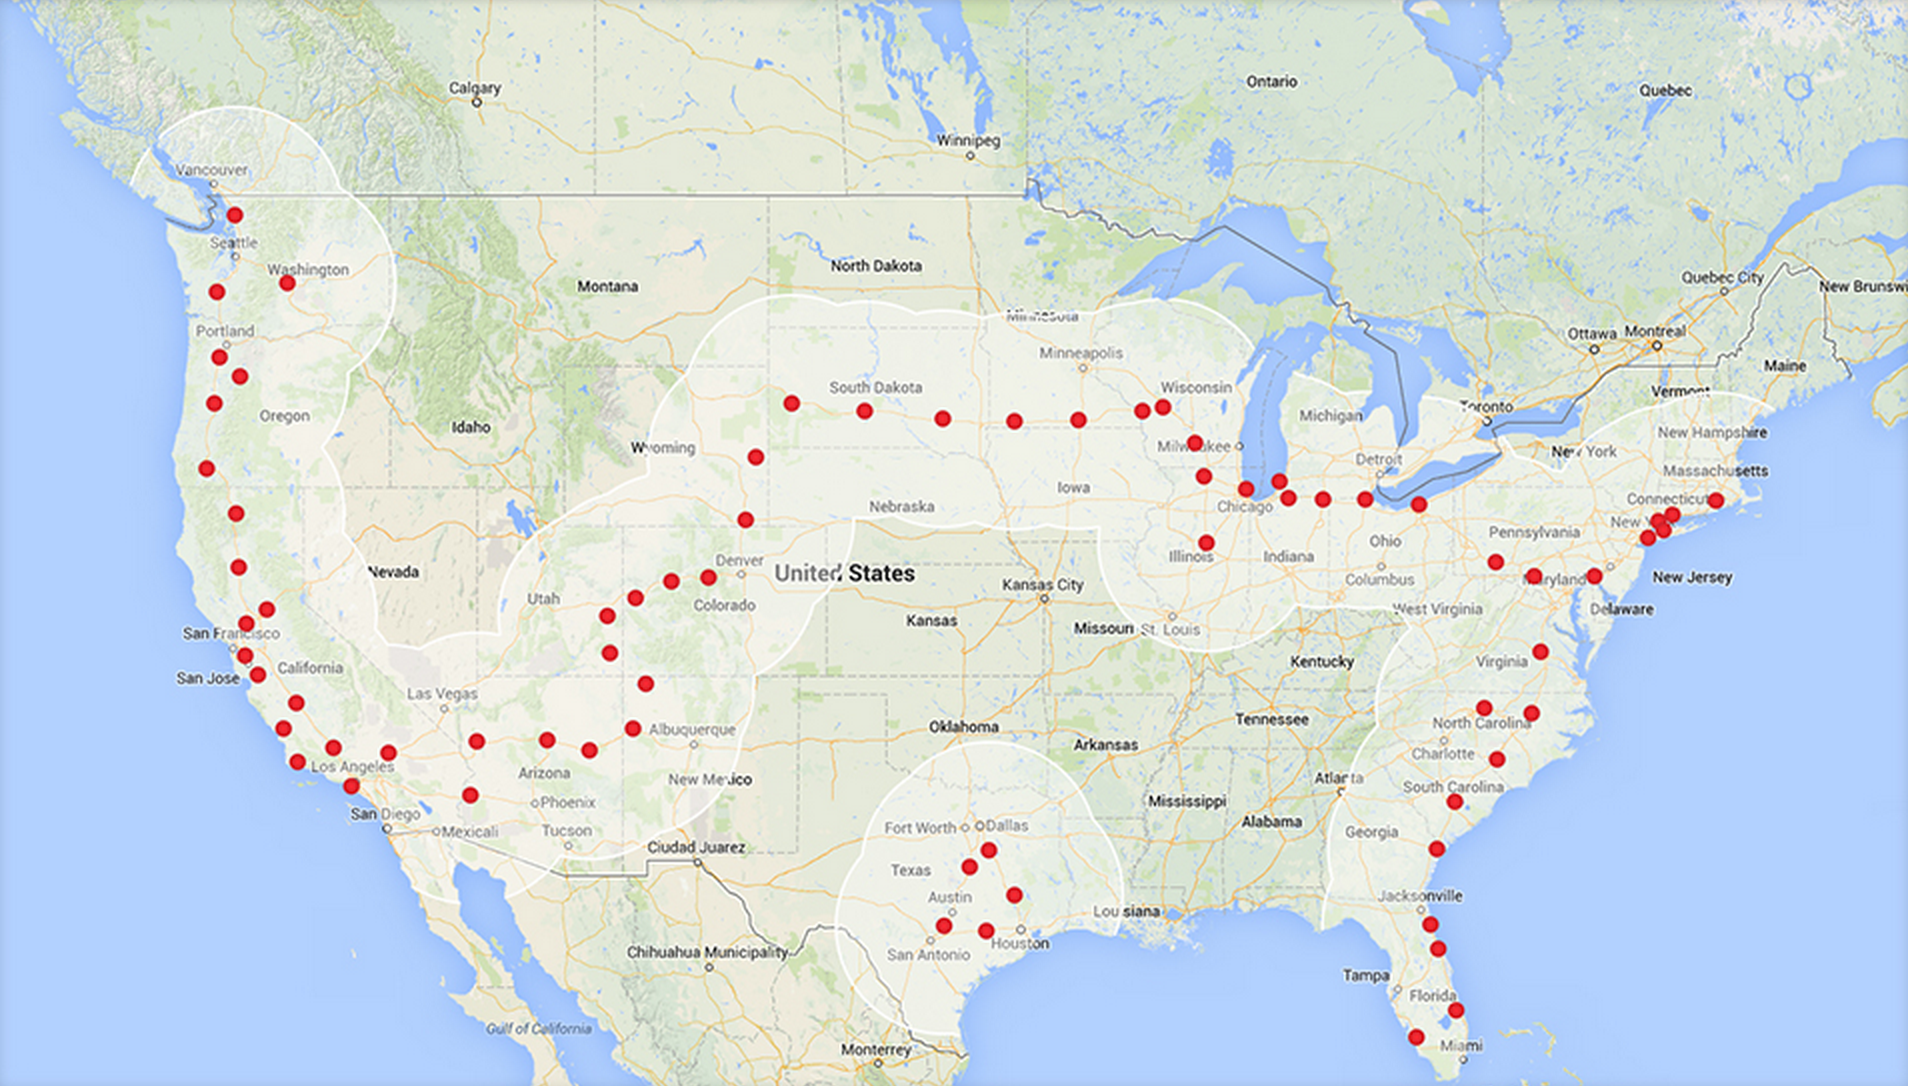 tesla model s owners can now drive coast to coast in the us image 2